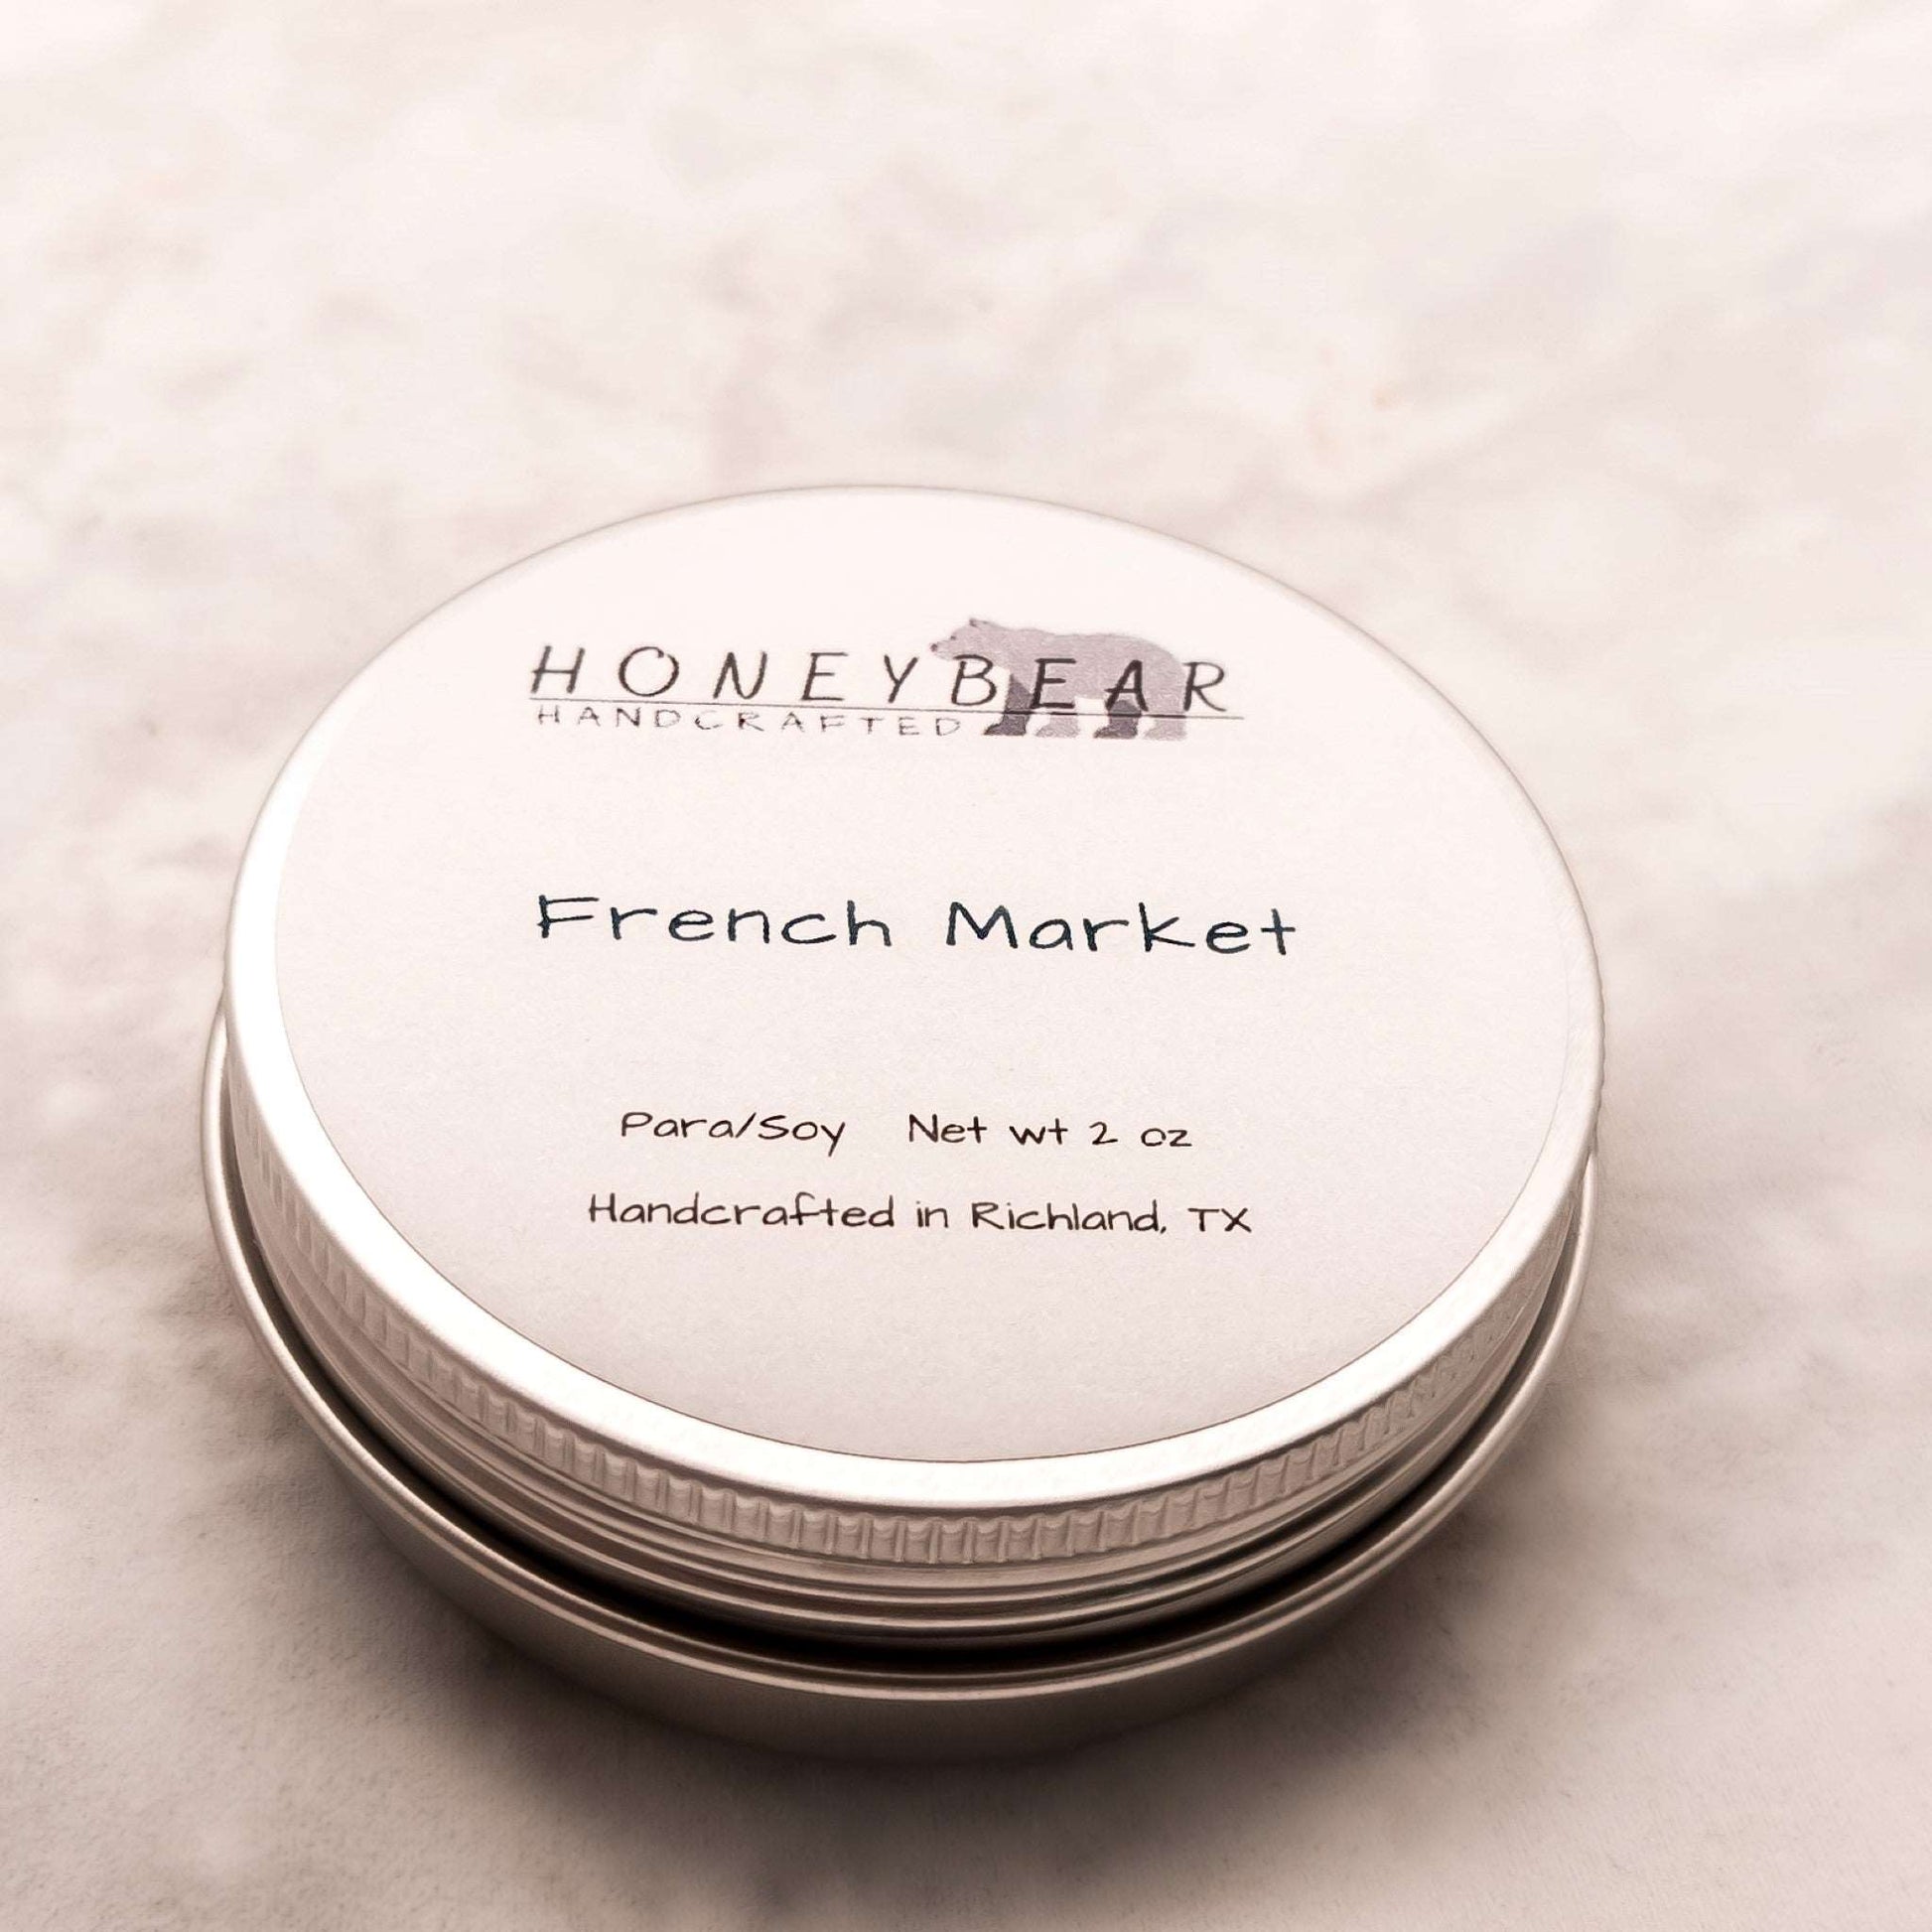 image of 2 oz travel or sample size candle labeled French Market on a white background